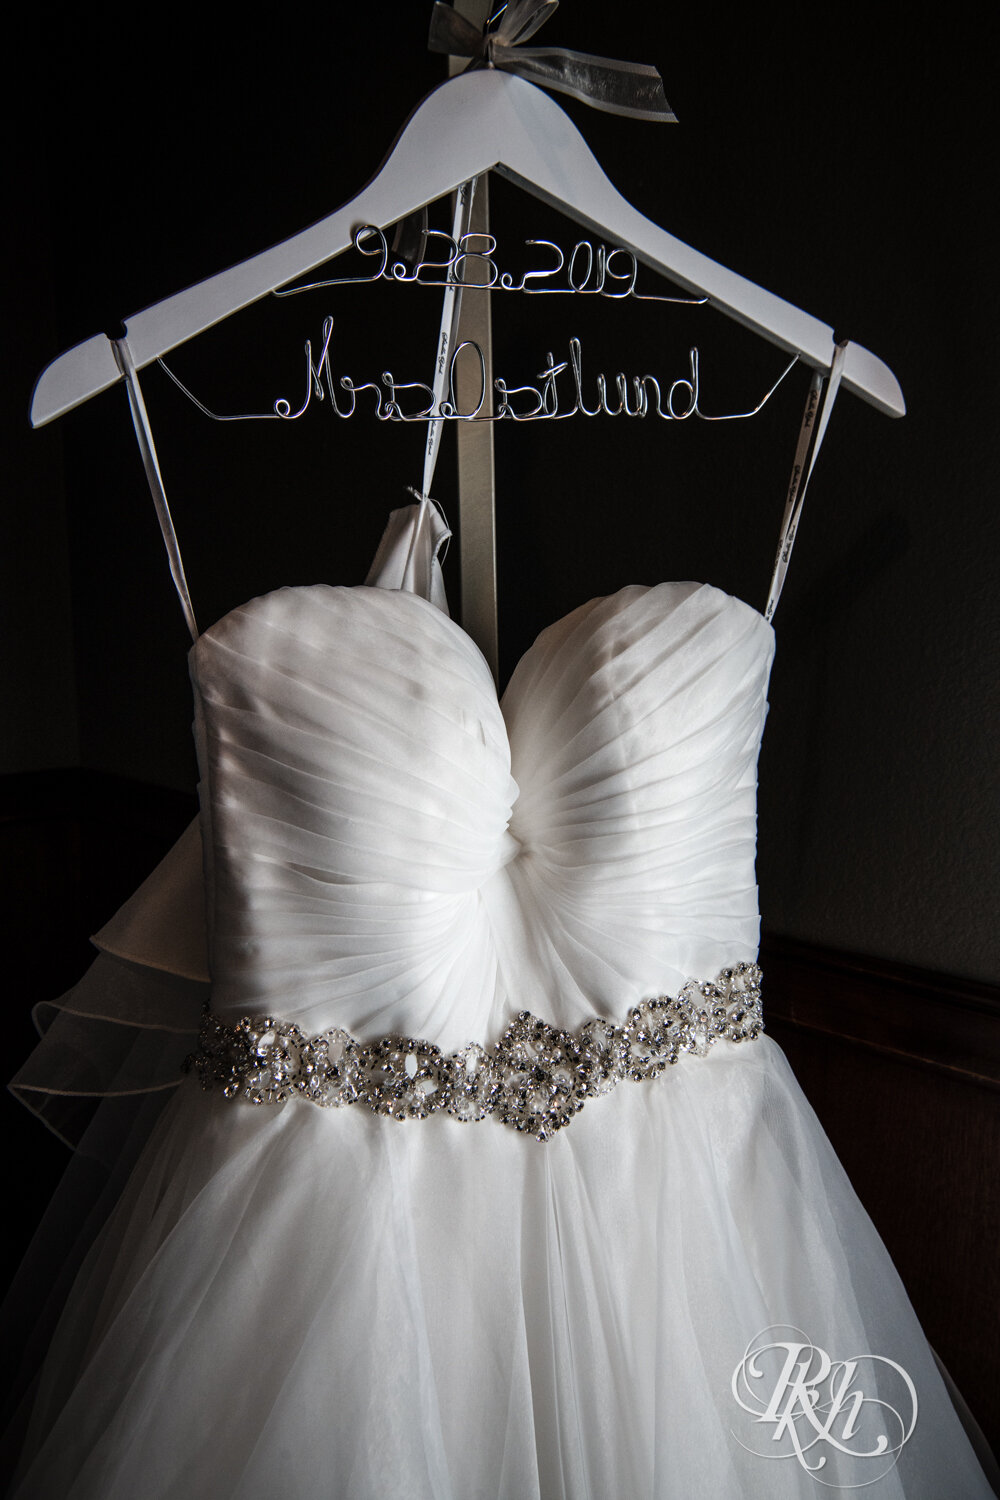 Wedding dress on hanger with date and last name at Rockwoods in Otsego, Minnesota.